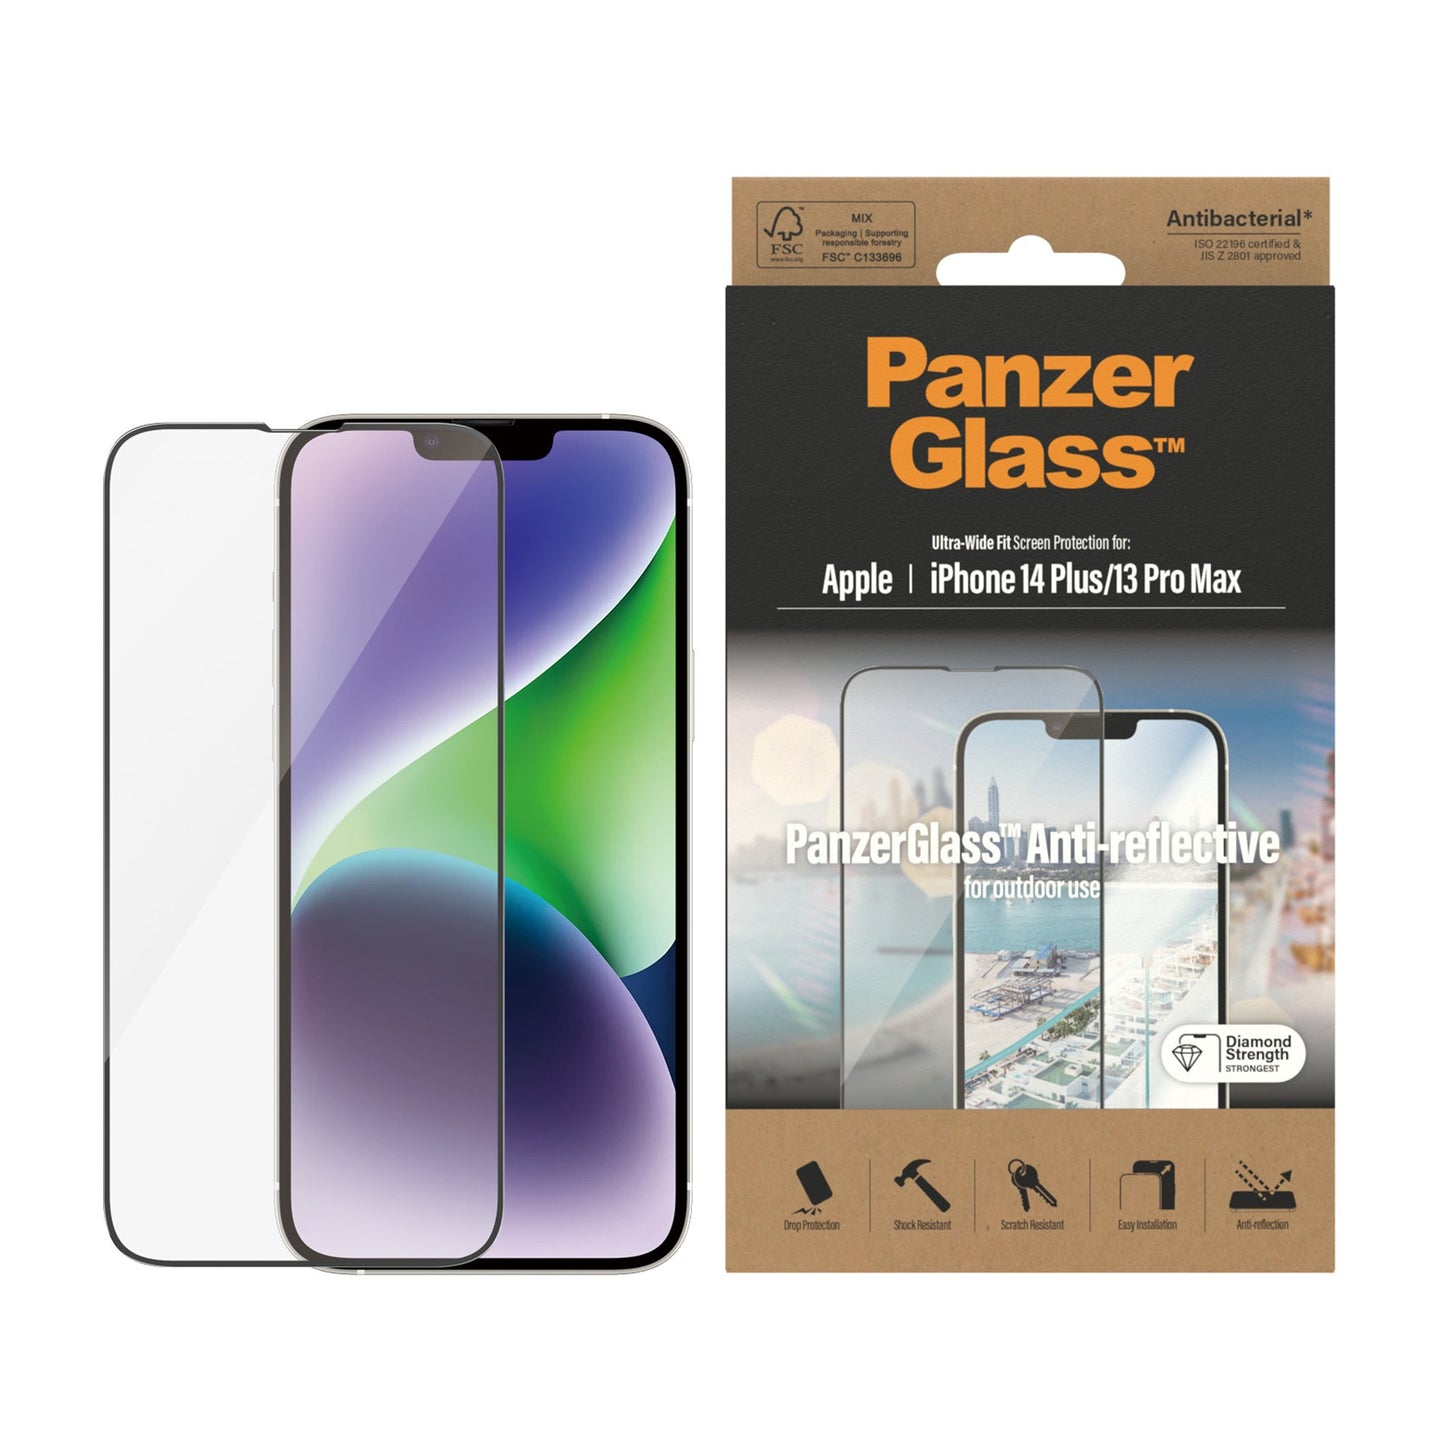 PanzerGlass™ Anti-reflective Screen Protector Apple iPhone 14 Plus | 13 Pro Max | Ultra-Wide Fit 2